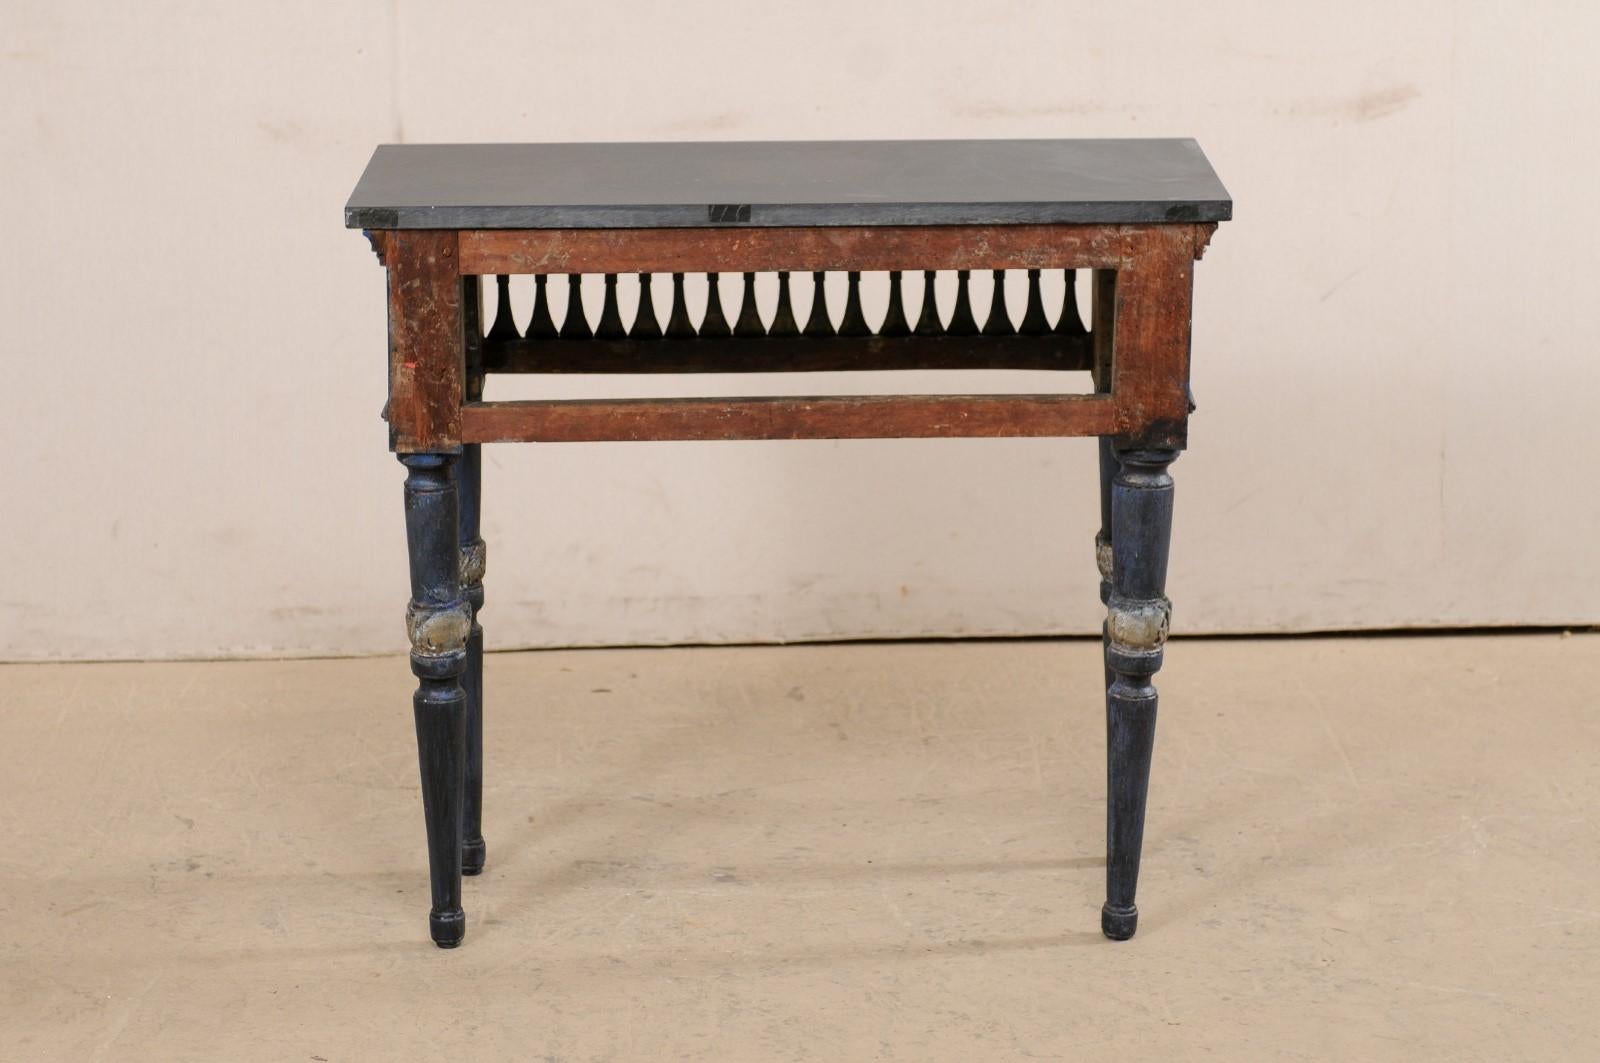 Italian Slate Stone Top Console w/ Beautifully Pierce-Carved Apron, Early 19th C For Sale 2